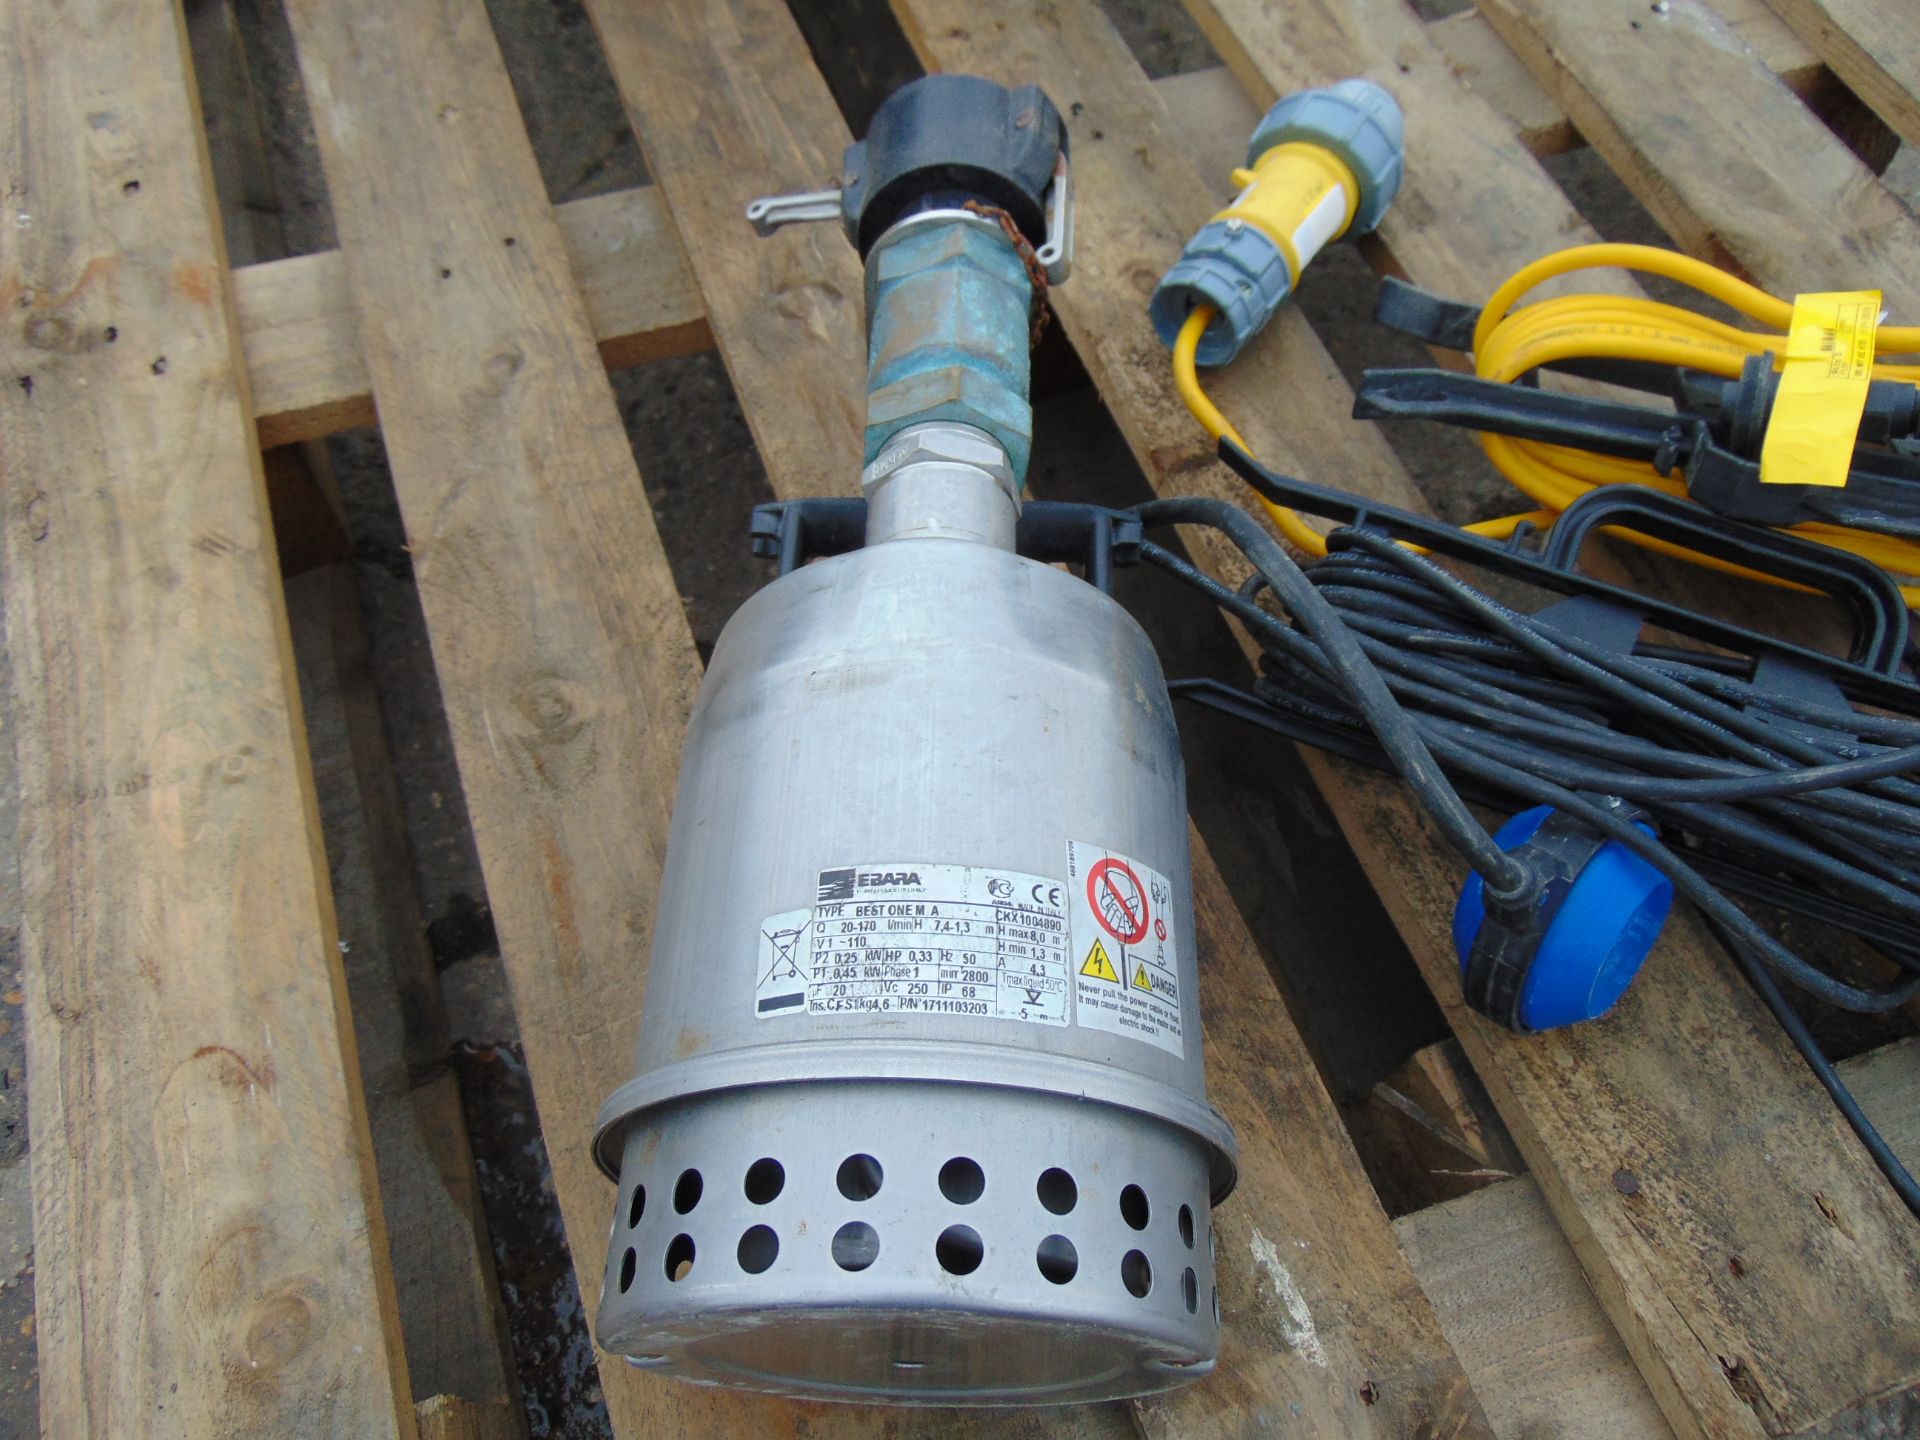 Ebara Best One MA Automatic Float Submersible Pump 110V - Image 3 of 4